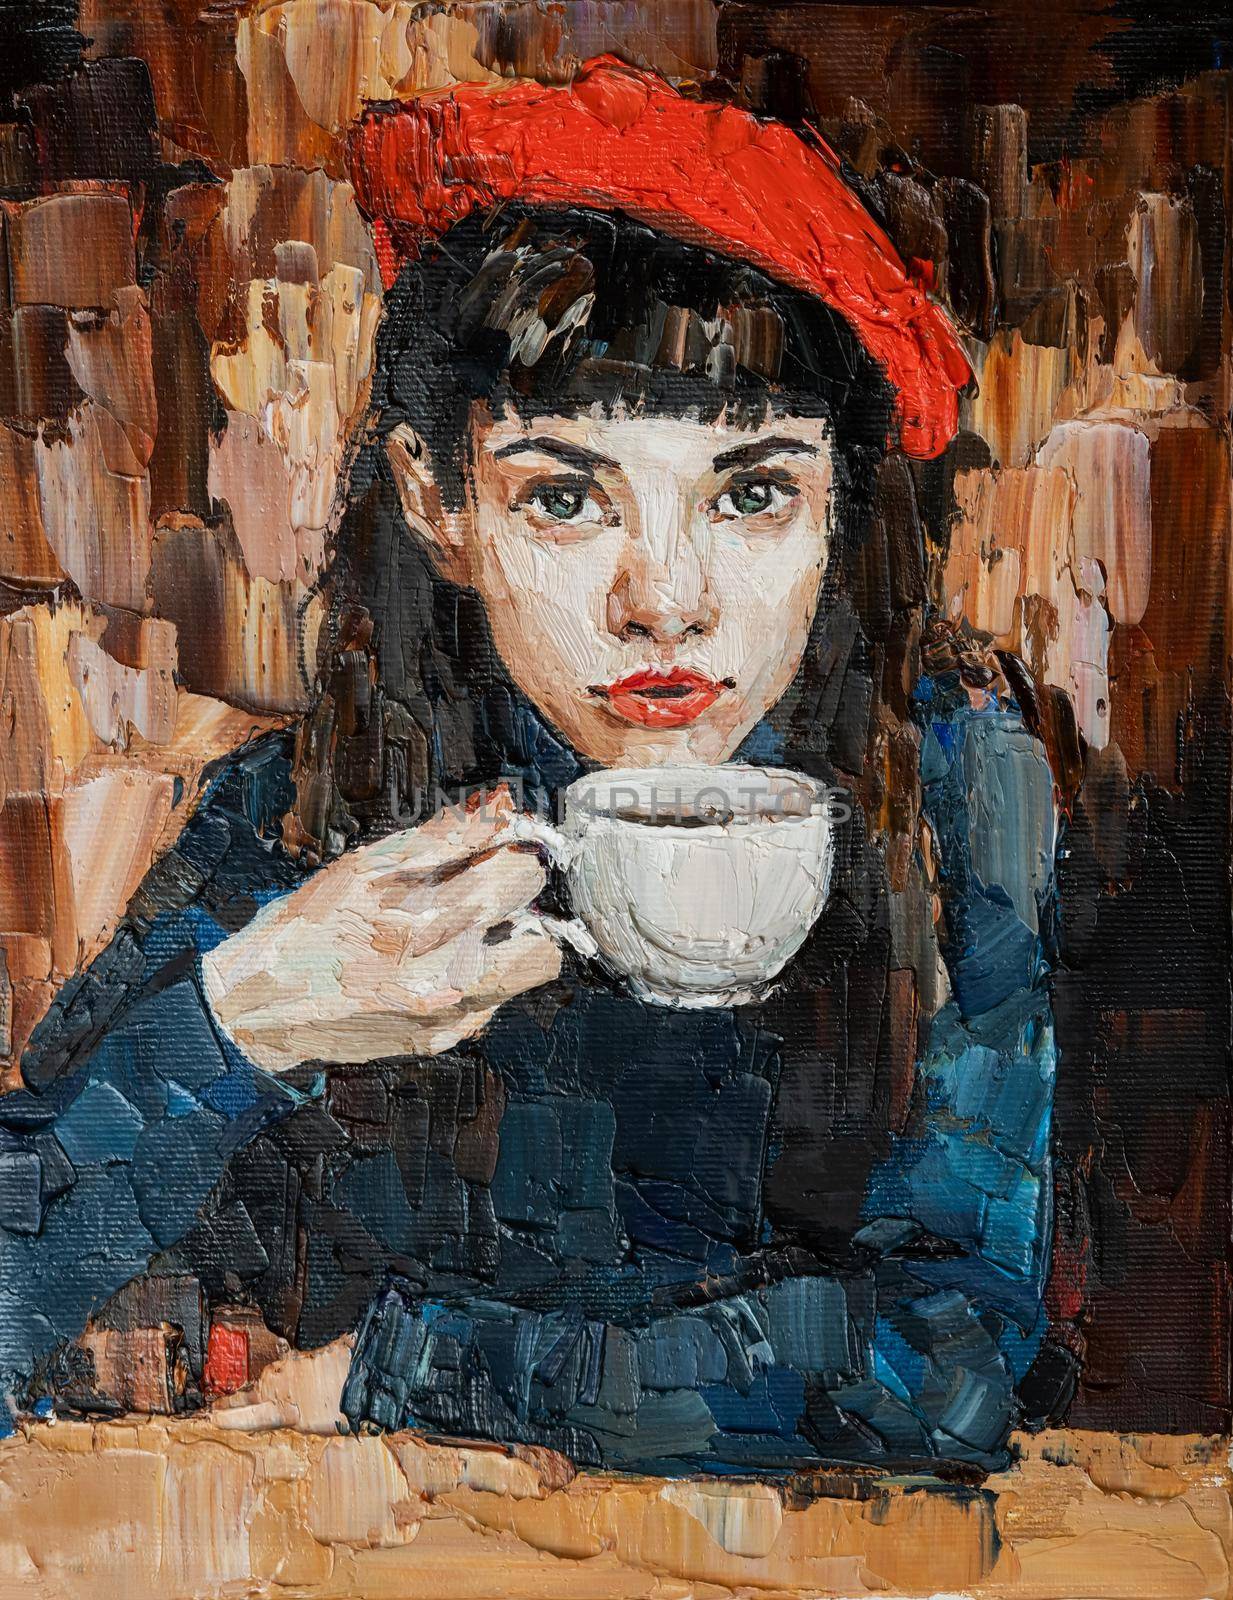 .The girl in the red beret. by jannojan